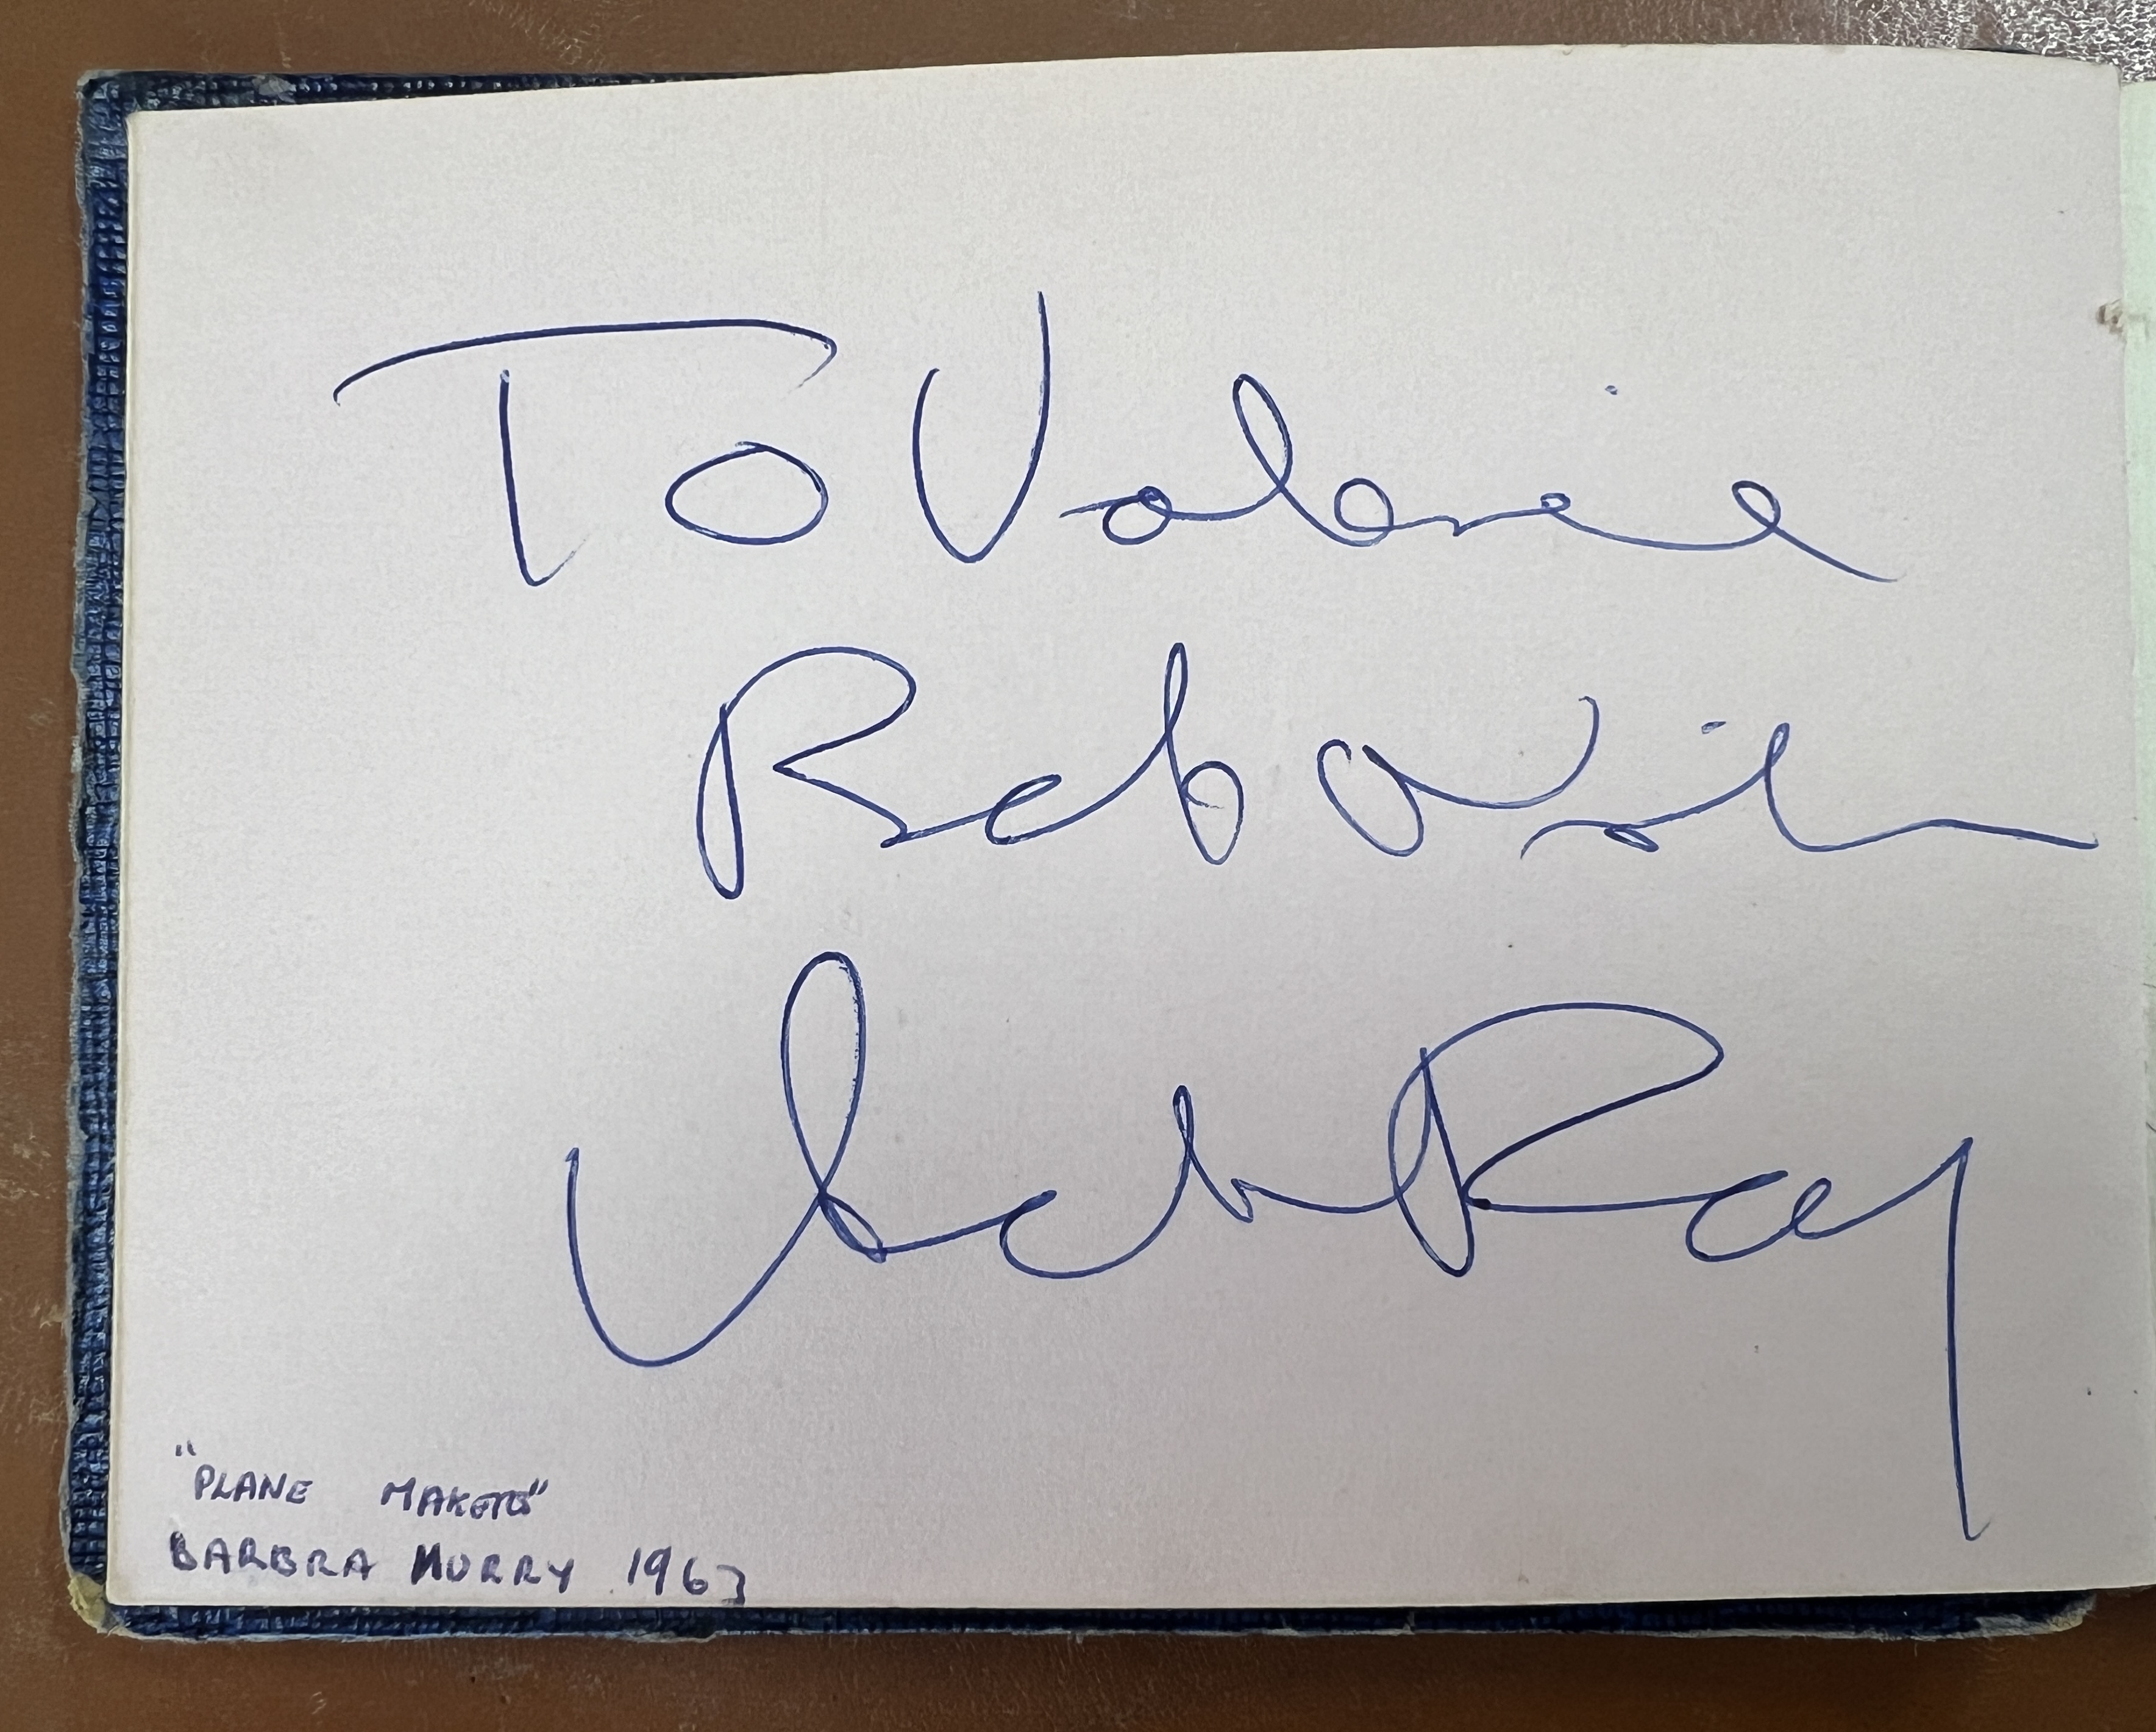 A 1960's autograph album containing autographs of various celebrities including Cliff Richard, - Image 14 of 37